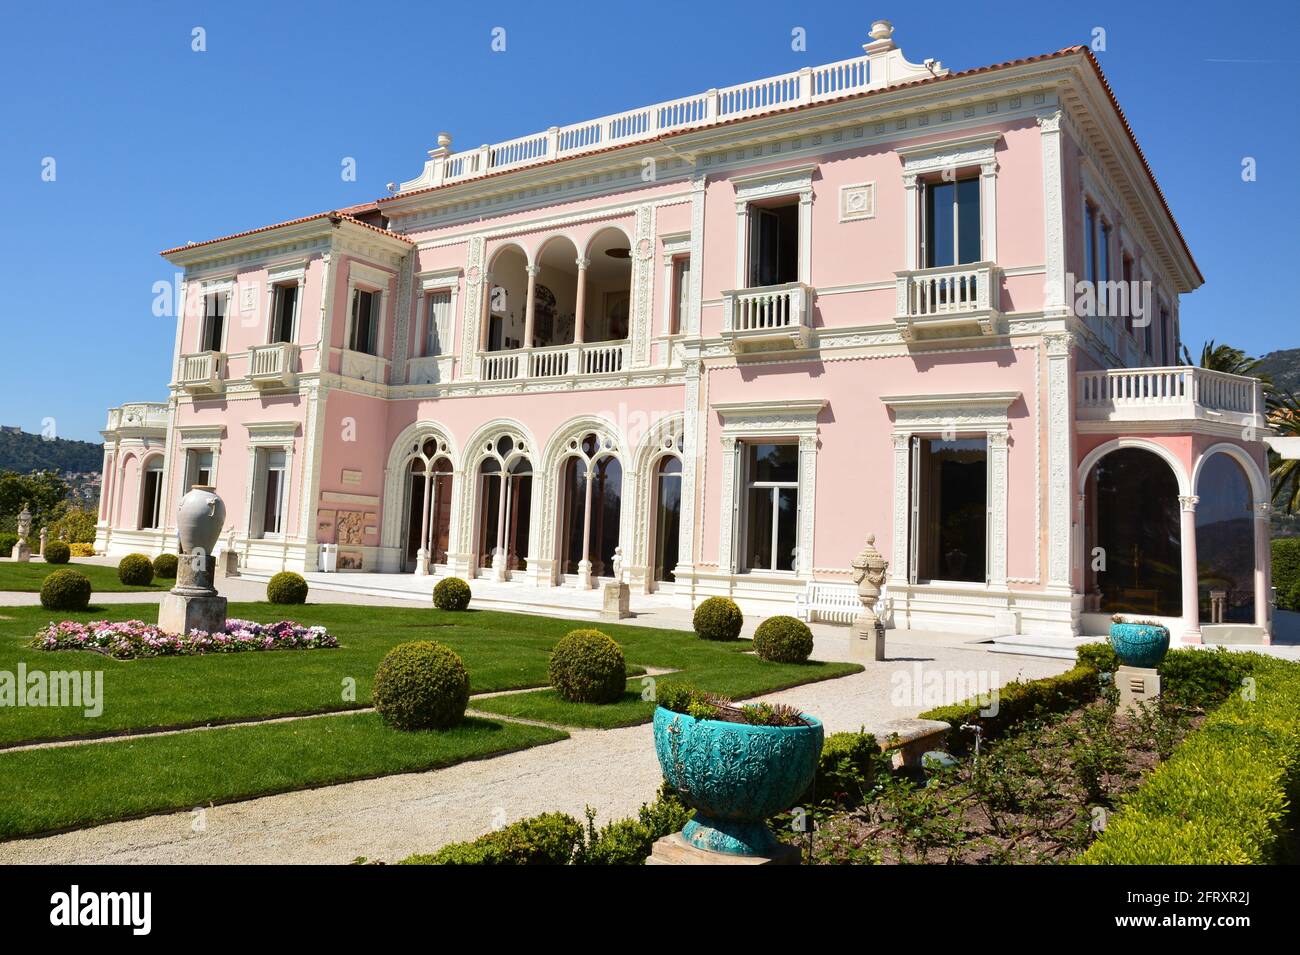 France, Alpes Maritimes, Saint Jean Cap Ferrat, The villa Rothschild is one of the beautiful palaces of the french riviera and the most visited. Stock Photo